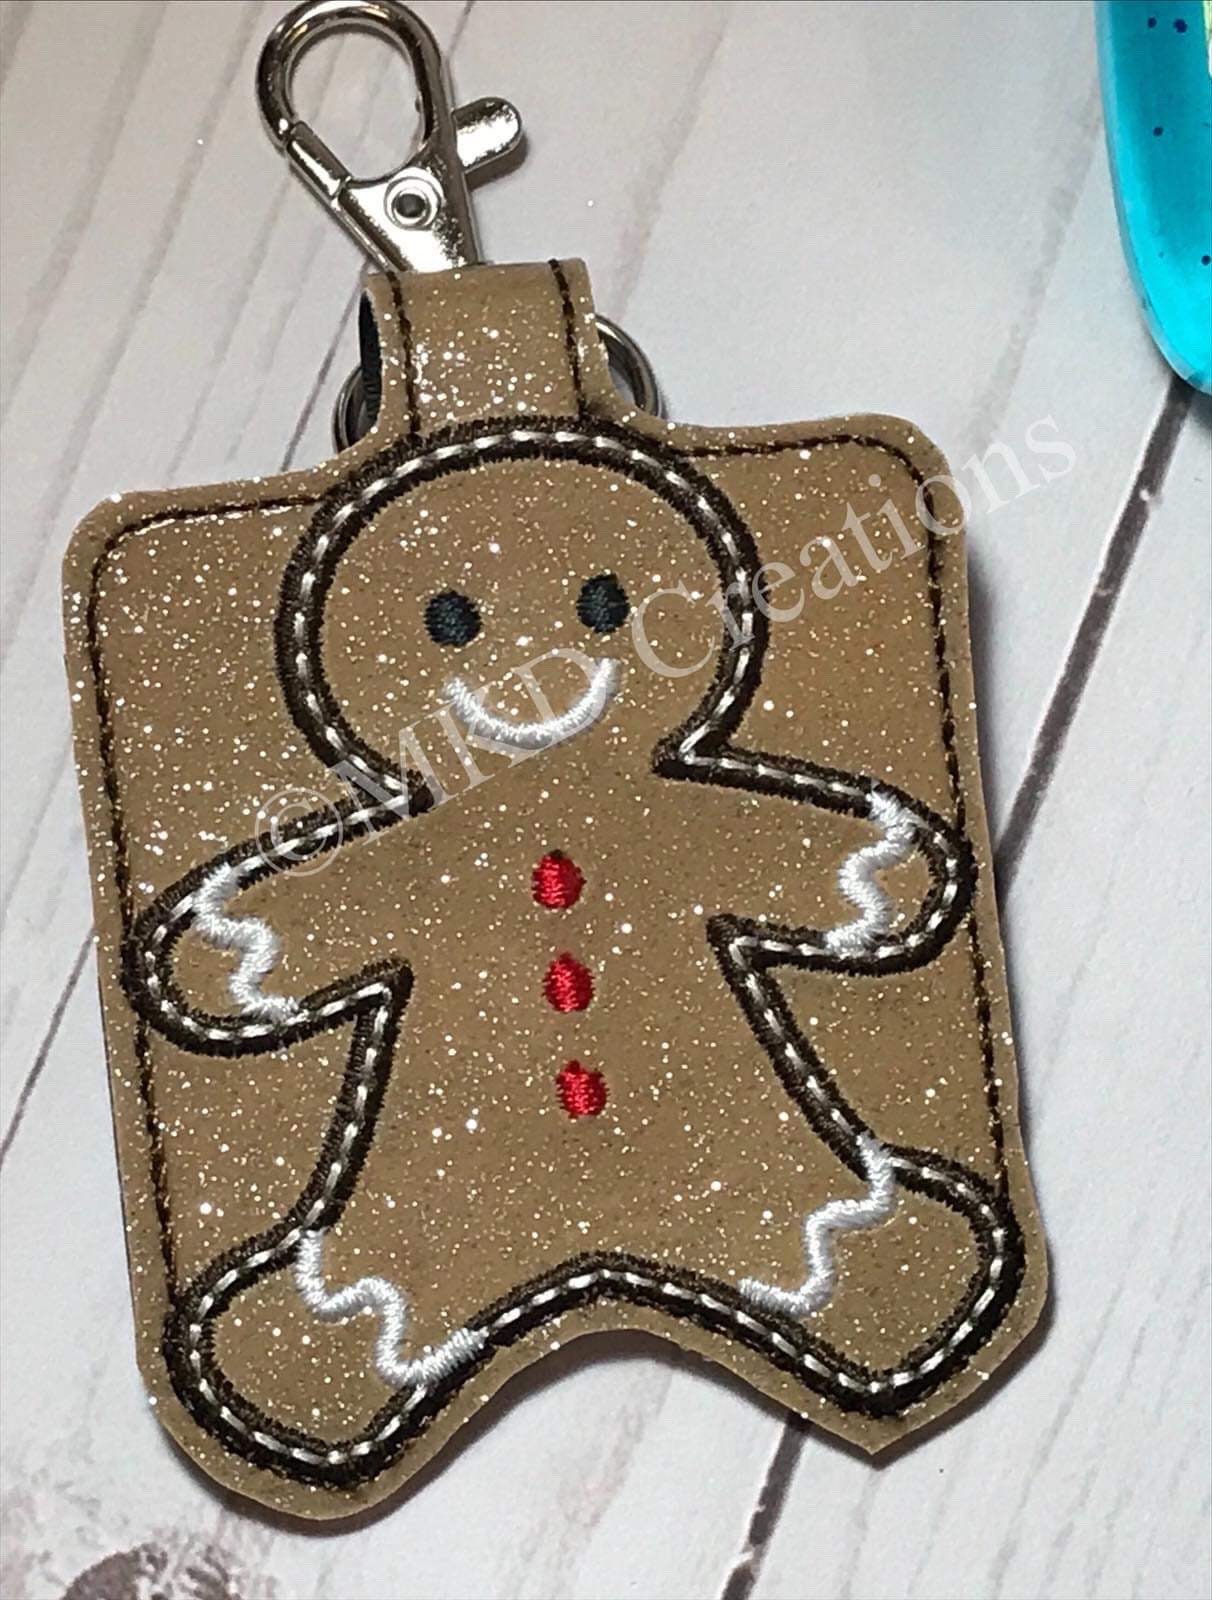 Gingerbread Boy Key chain hand sanitizer holder w/o 1 oz. hand sanitizer | key chain for 1 oz hand sanitizers (not included